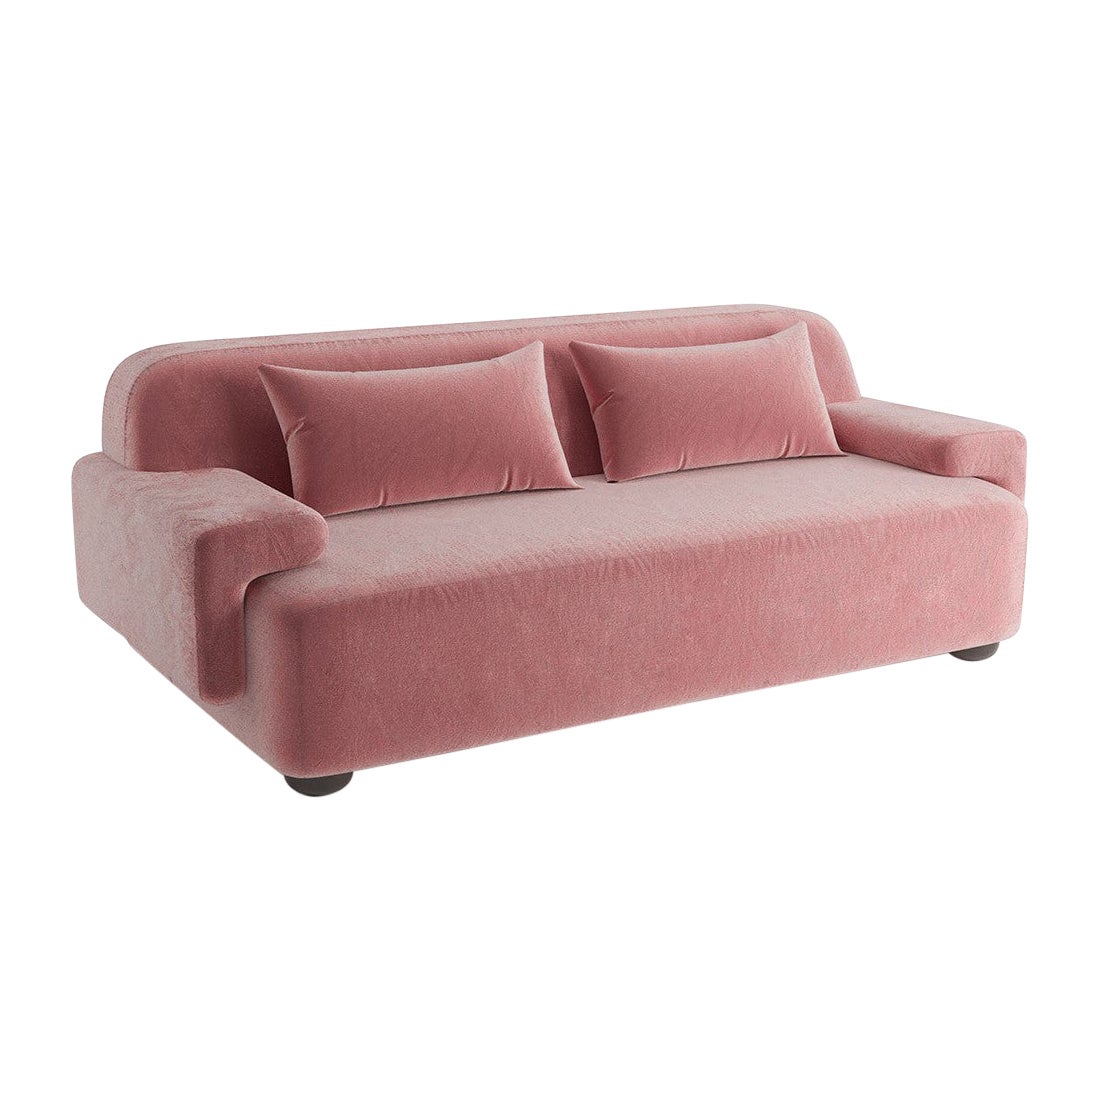 Popus Editions Lena 3 Seater Sofa in Pink Verone Velvet Upholstery